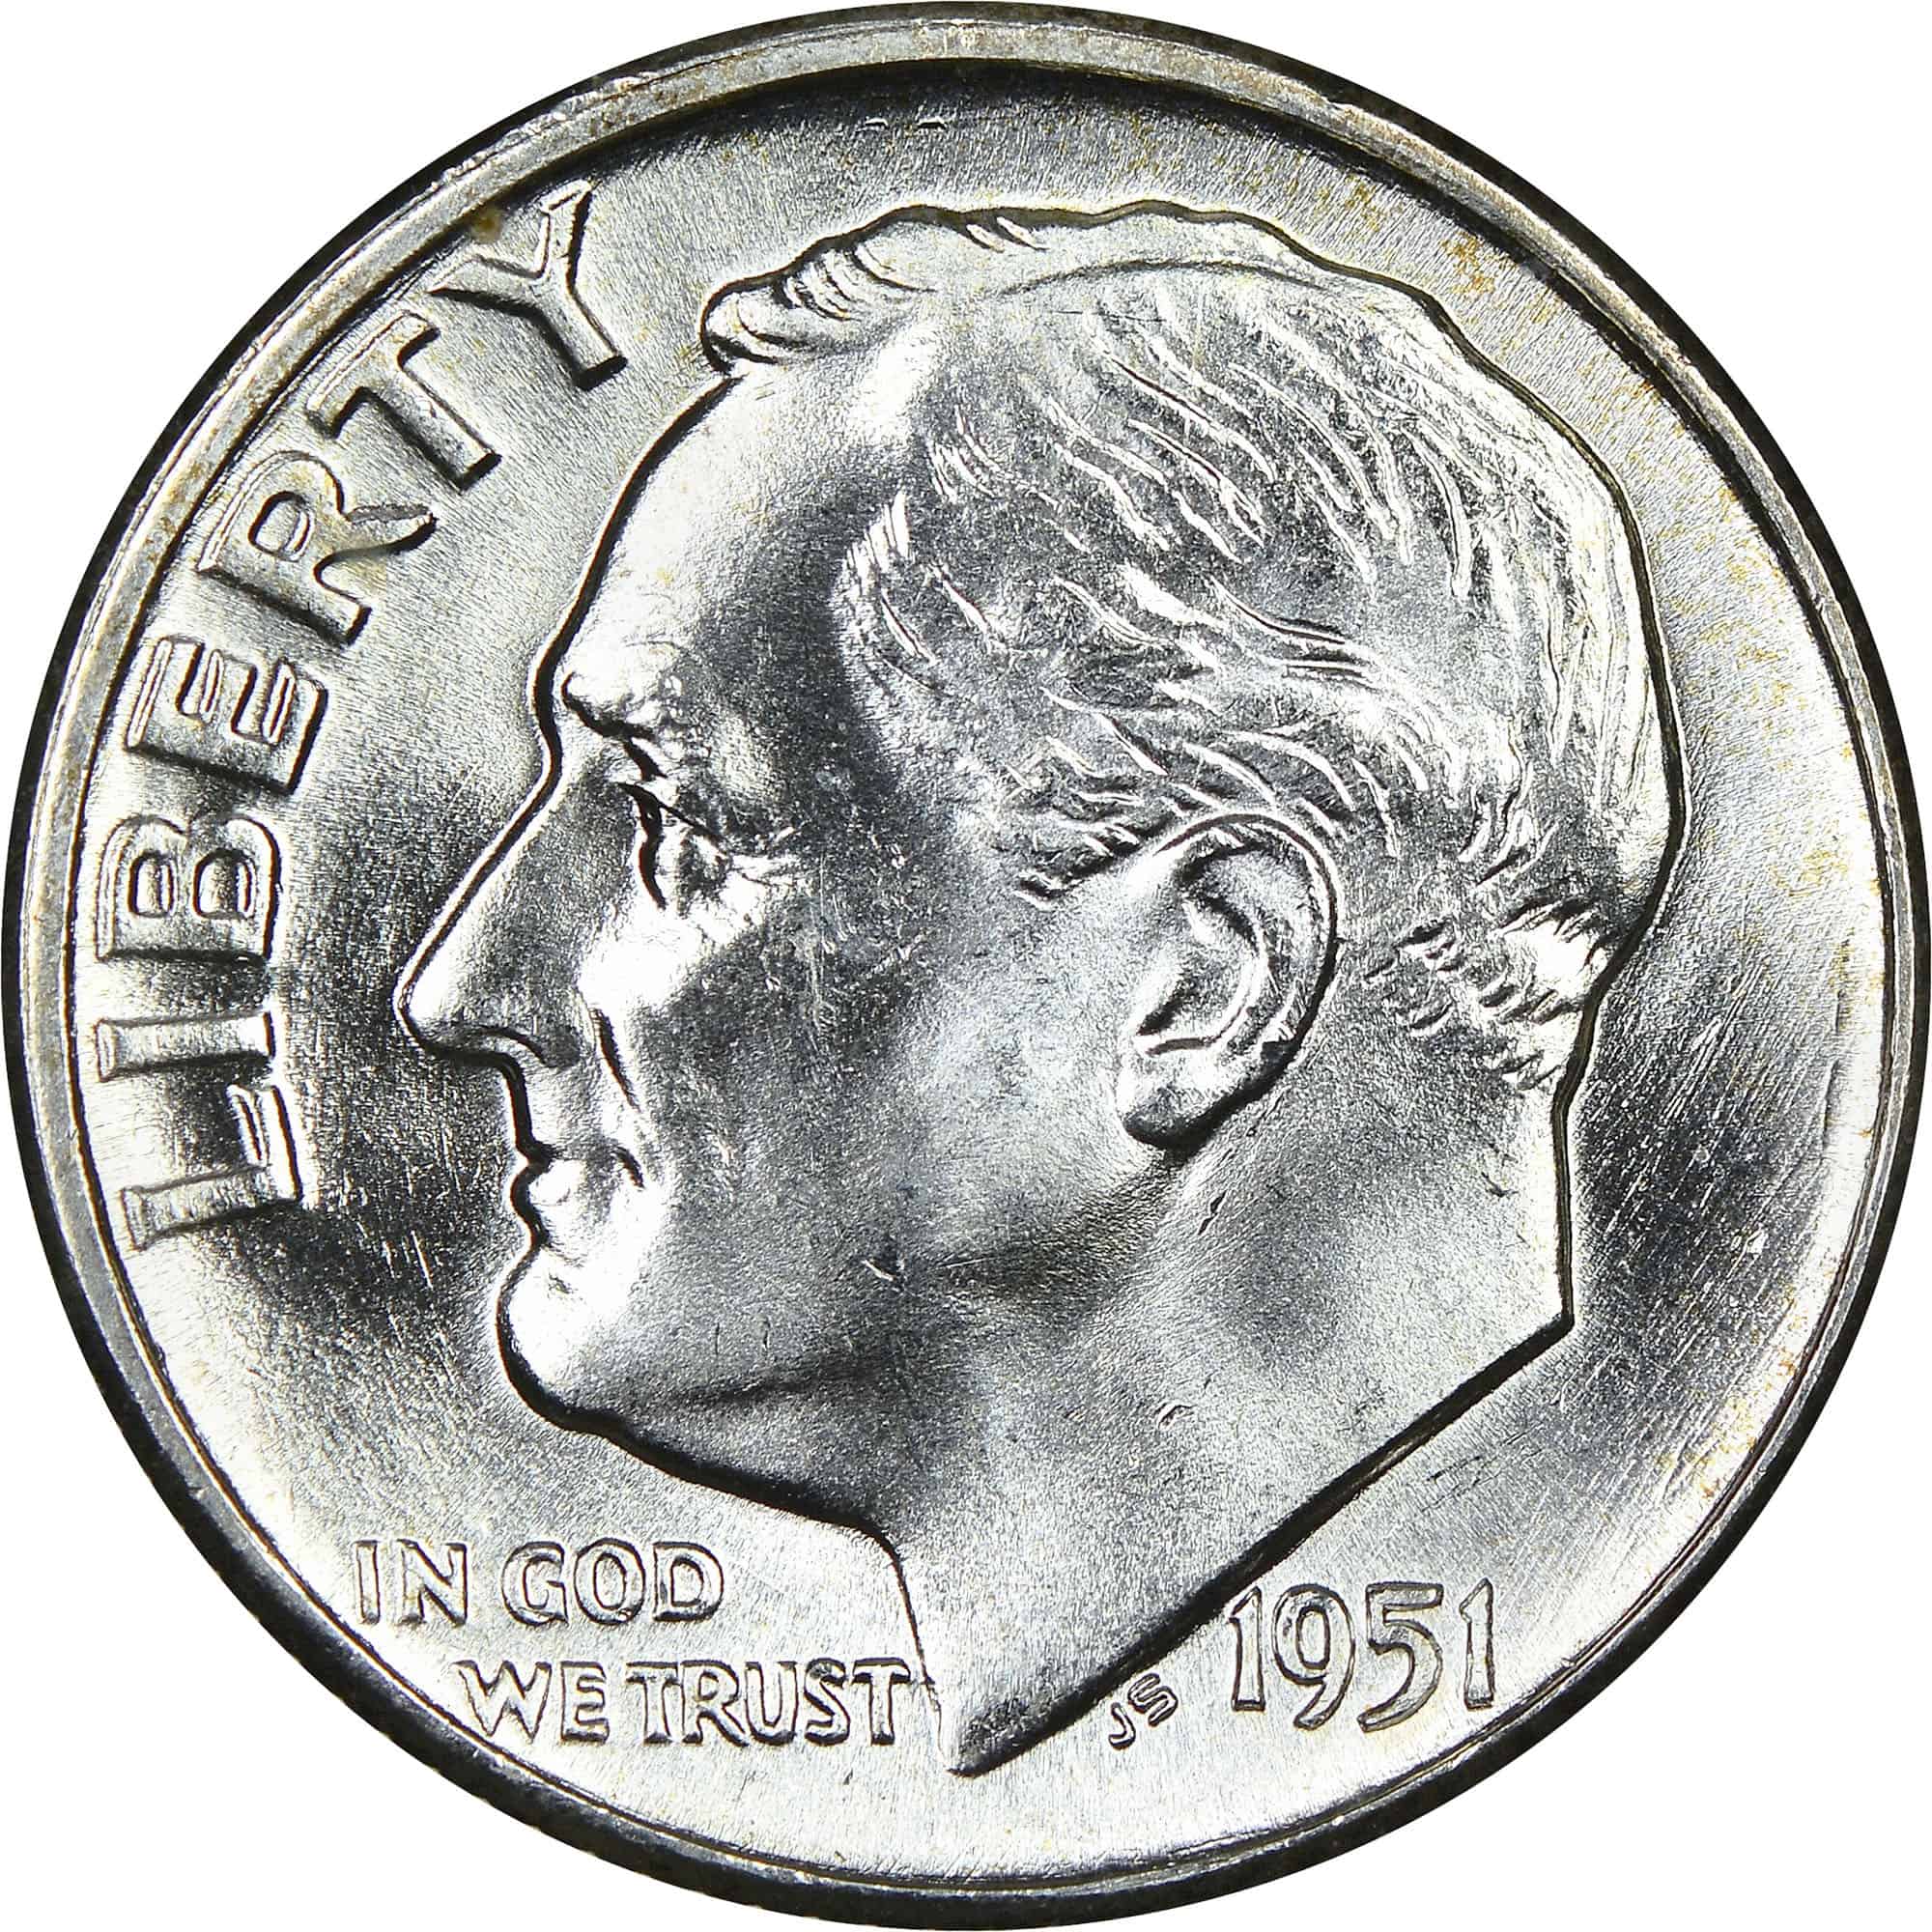 The obverse of the 1951 Roosevelt dime